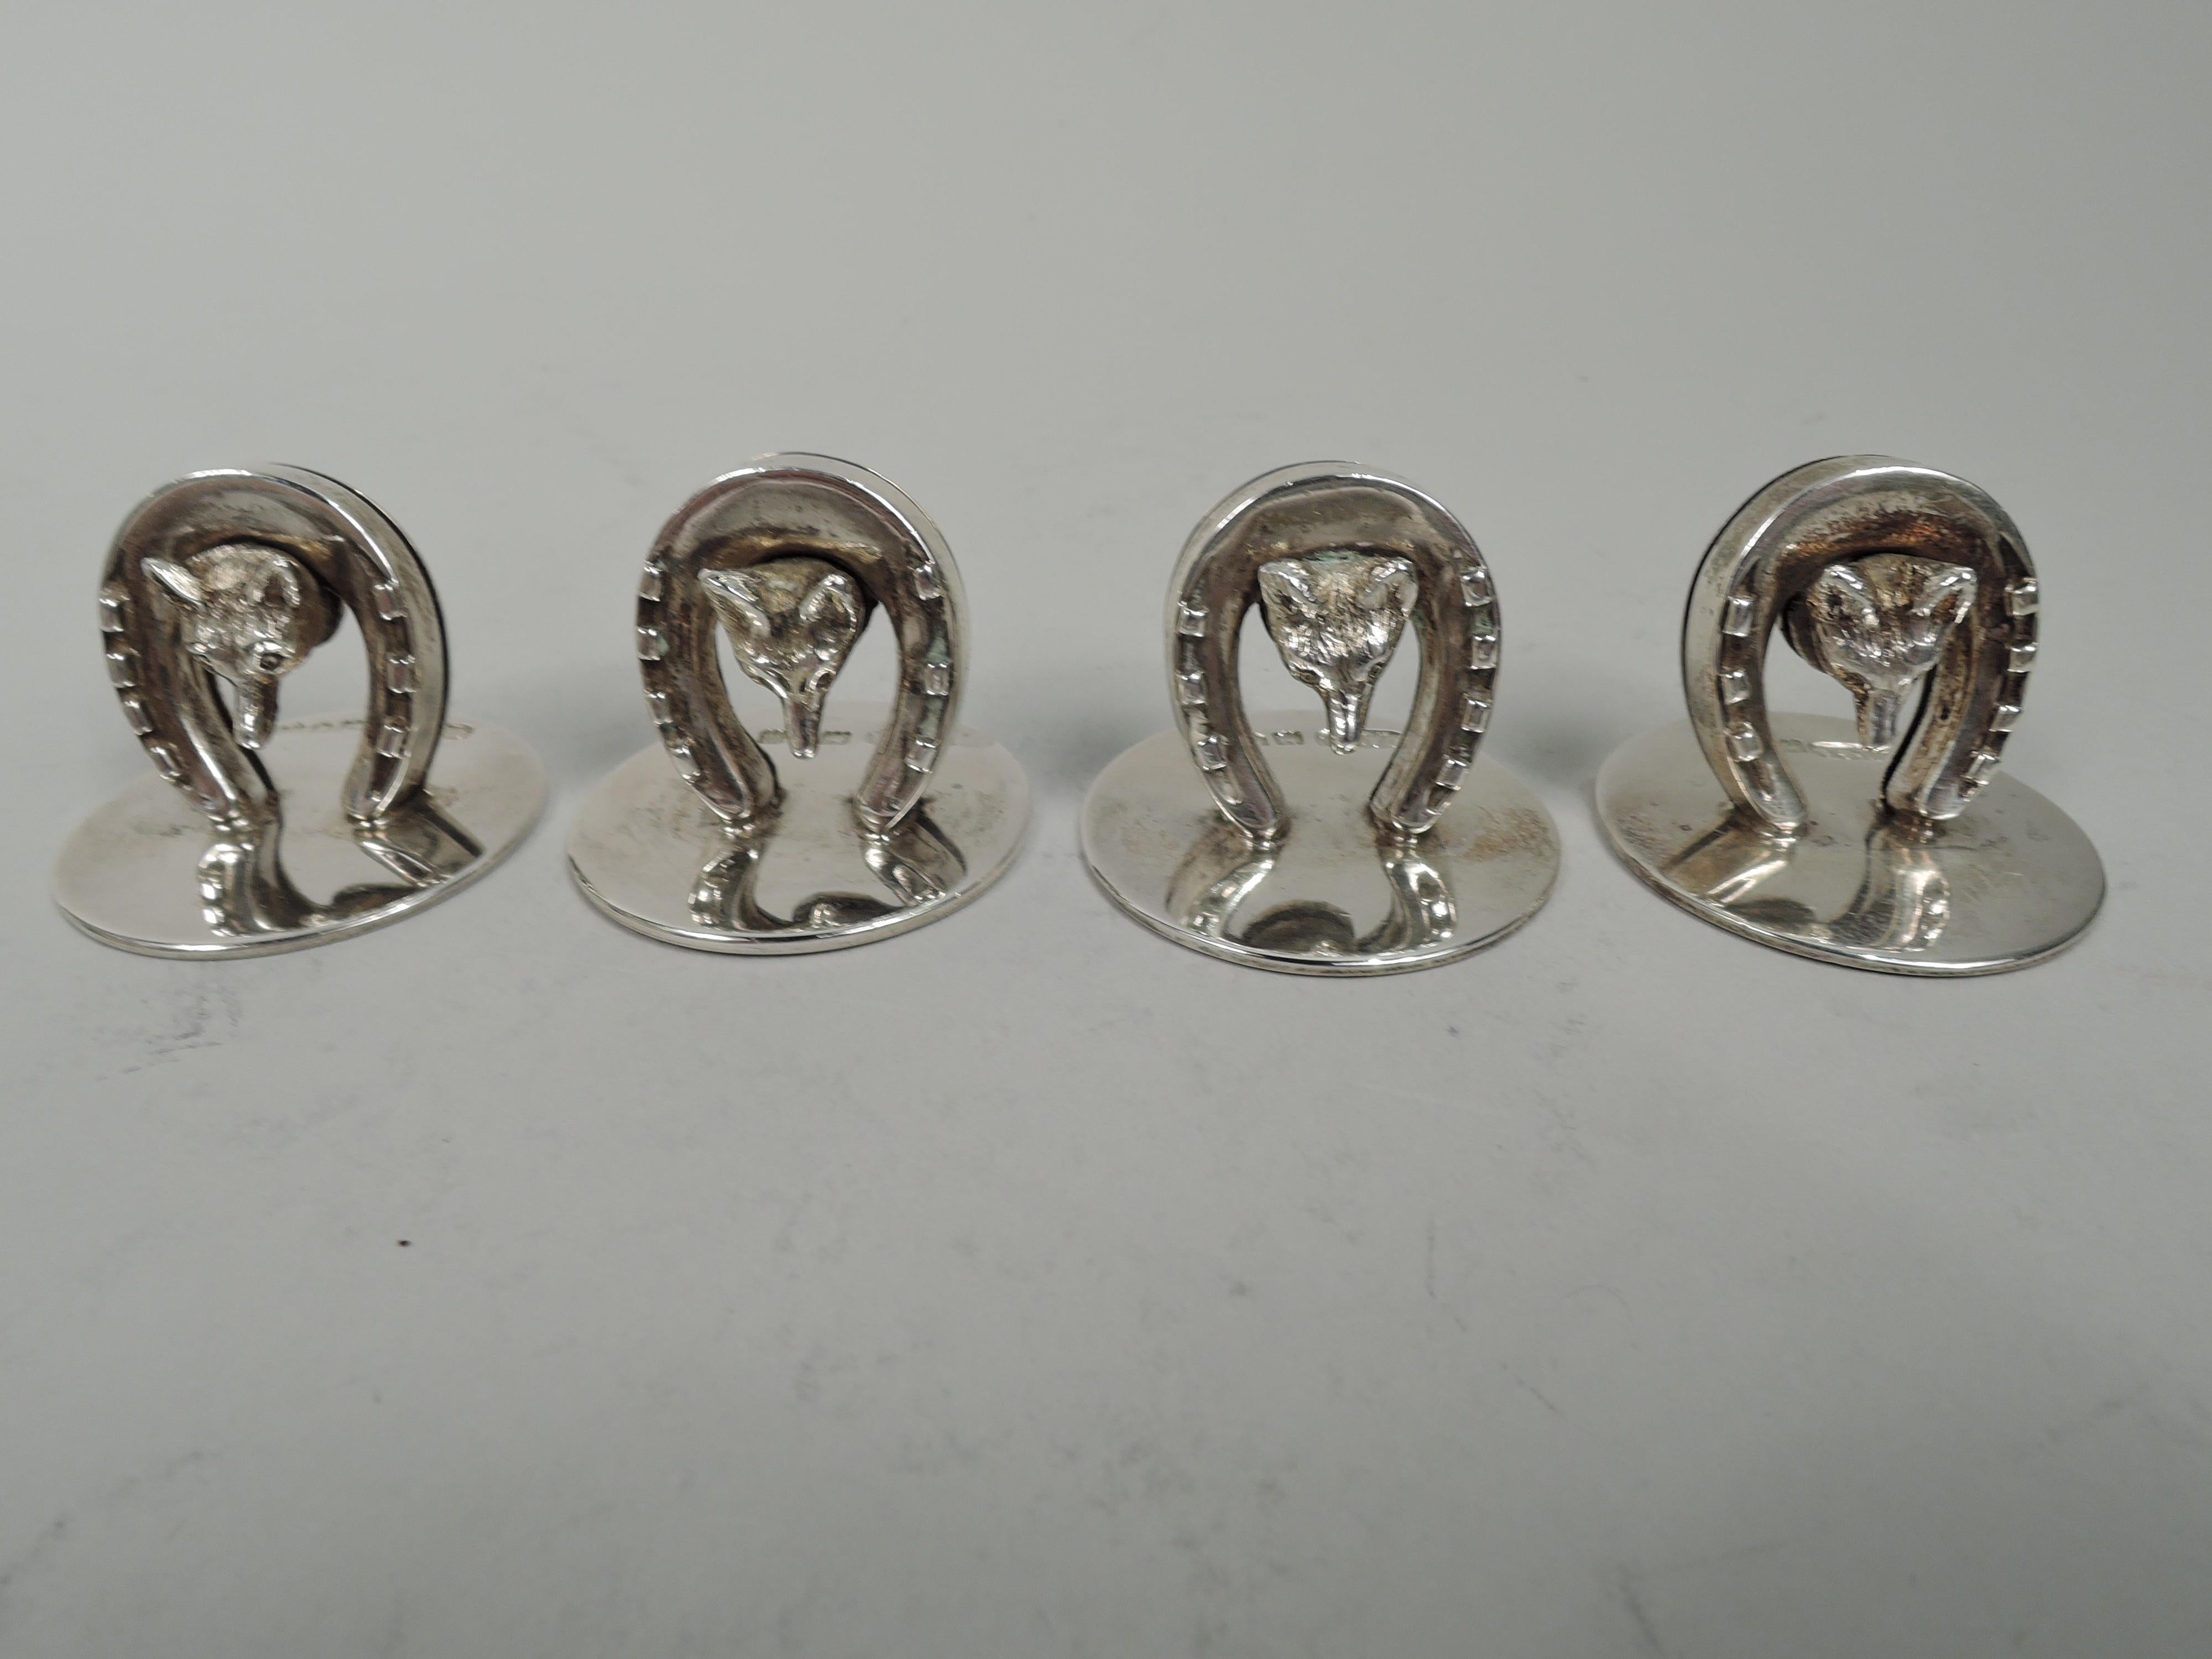 Set of 4 Edwardian sterling silver place card holders. Made by Charles & George Asprey in London, 1906 to 1908. Each: A cast fox head pokes through a horseshoe clip; round and flat base. In leather-bound case with silk and fitted-velvet lining.